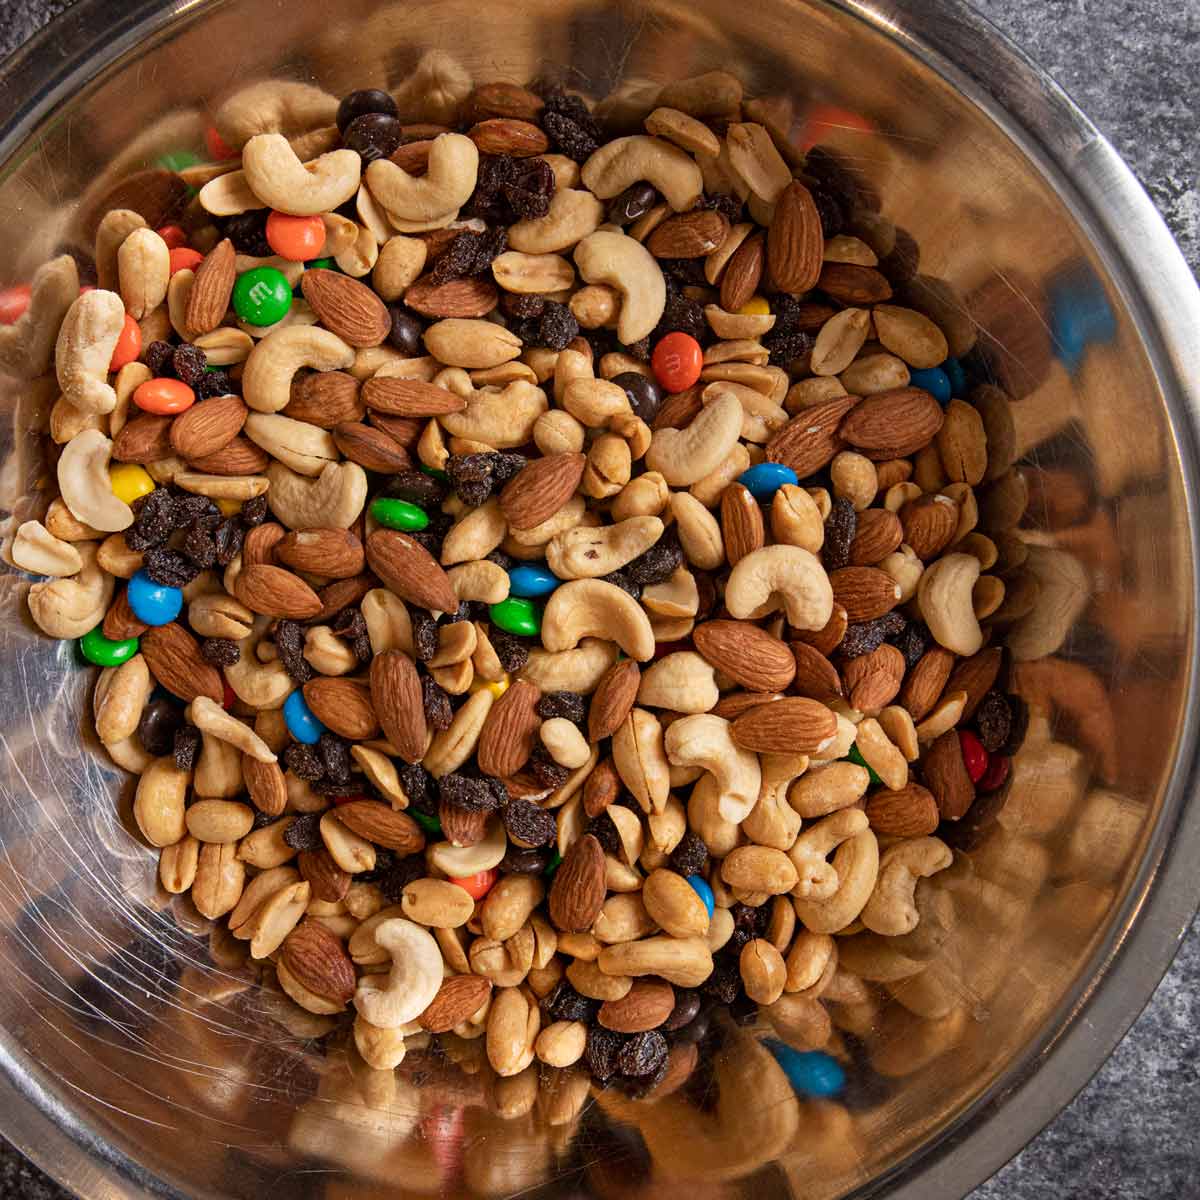 Wholesale Chocolate Trail Mix made with nuts.